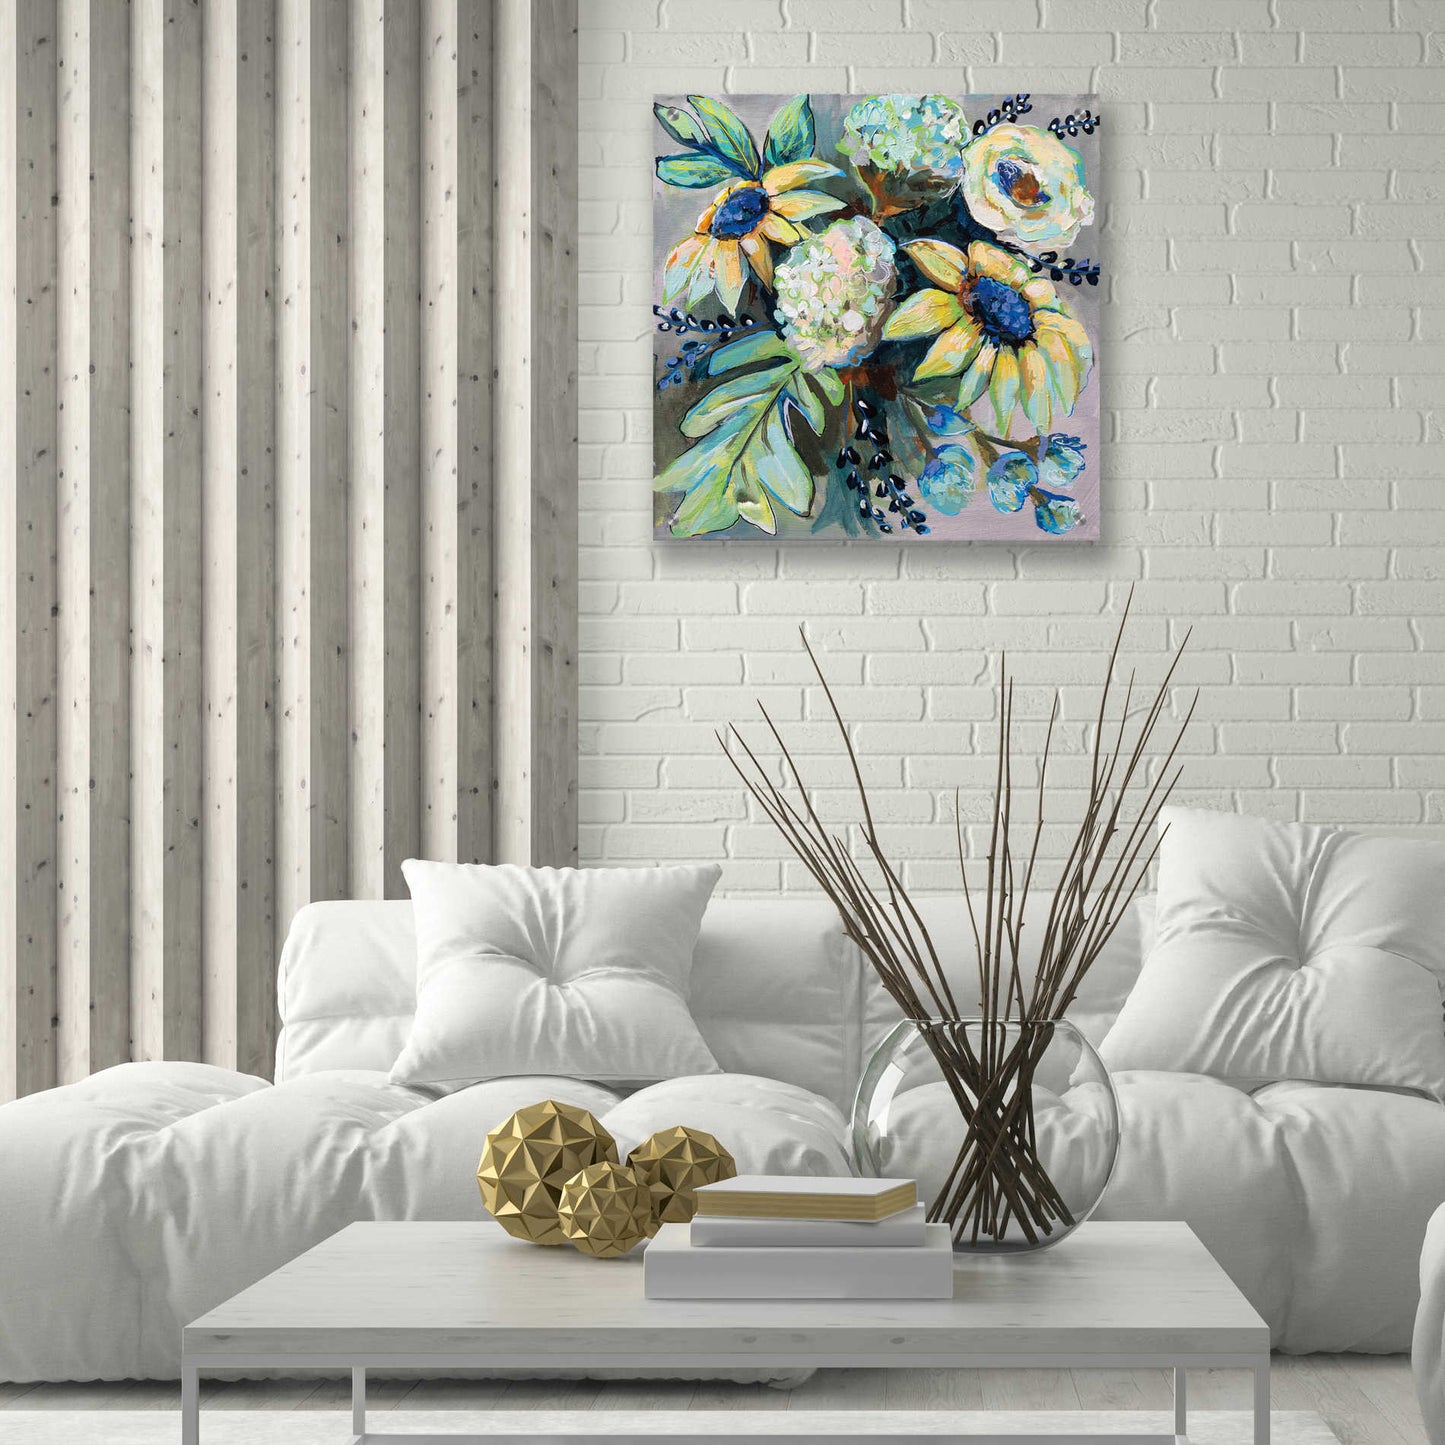 Epic Art 'Sage and Sunflowers II' by Jeanette Vertentes, Acrylic Glass Wall Art,24x24